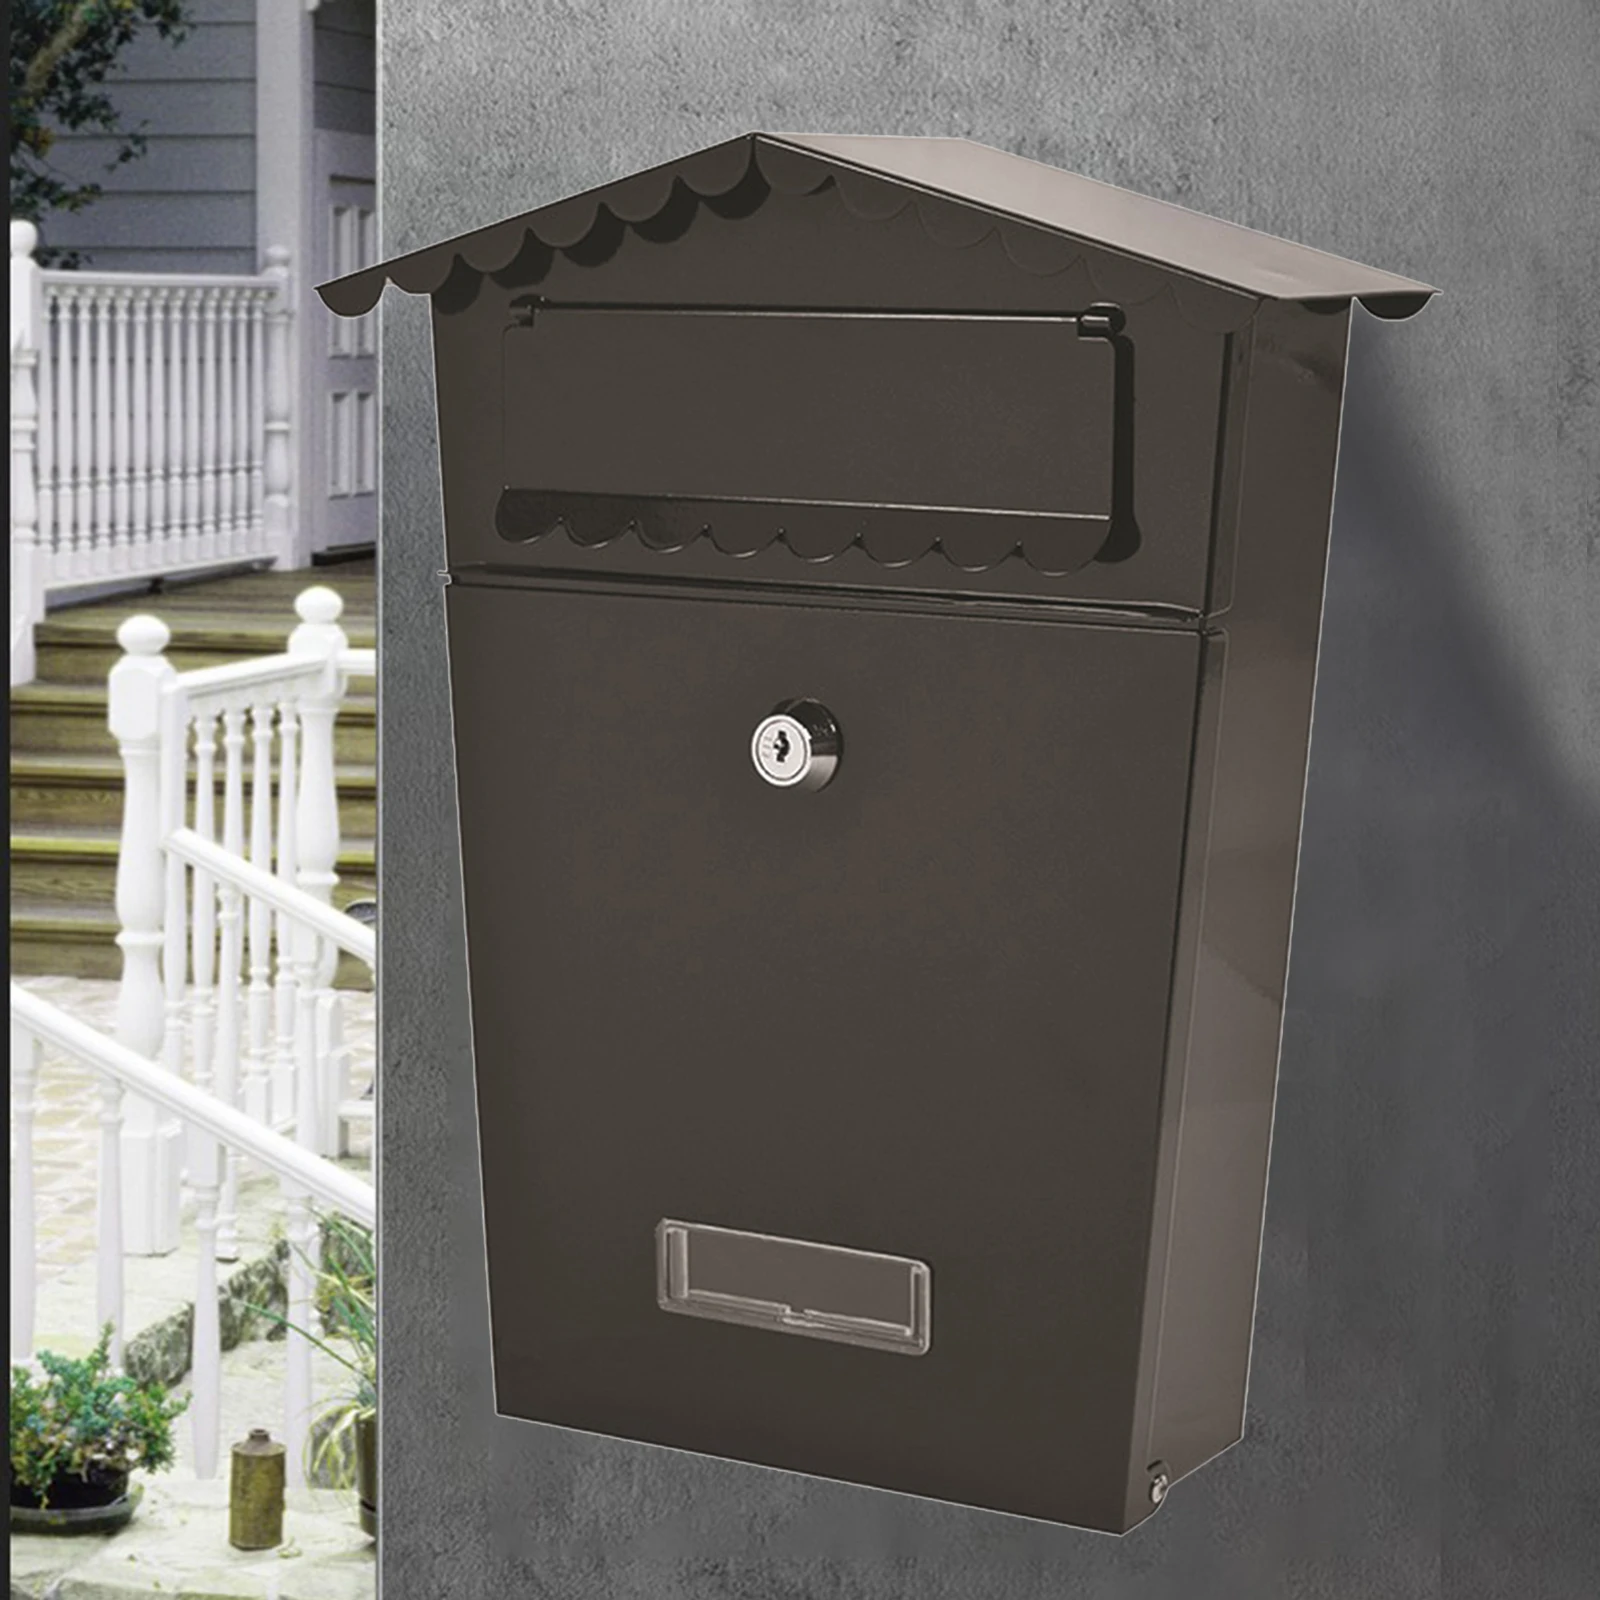 30.3x17.3x7.9Inch,Mailbox Wall Mount Mailbox With Lock and Key Parcel Drop Box 